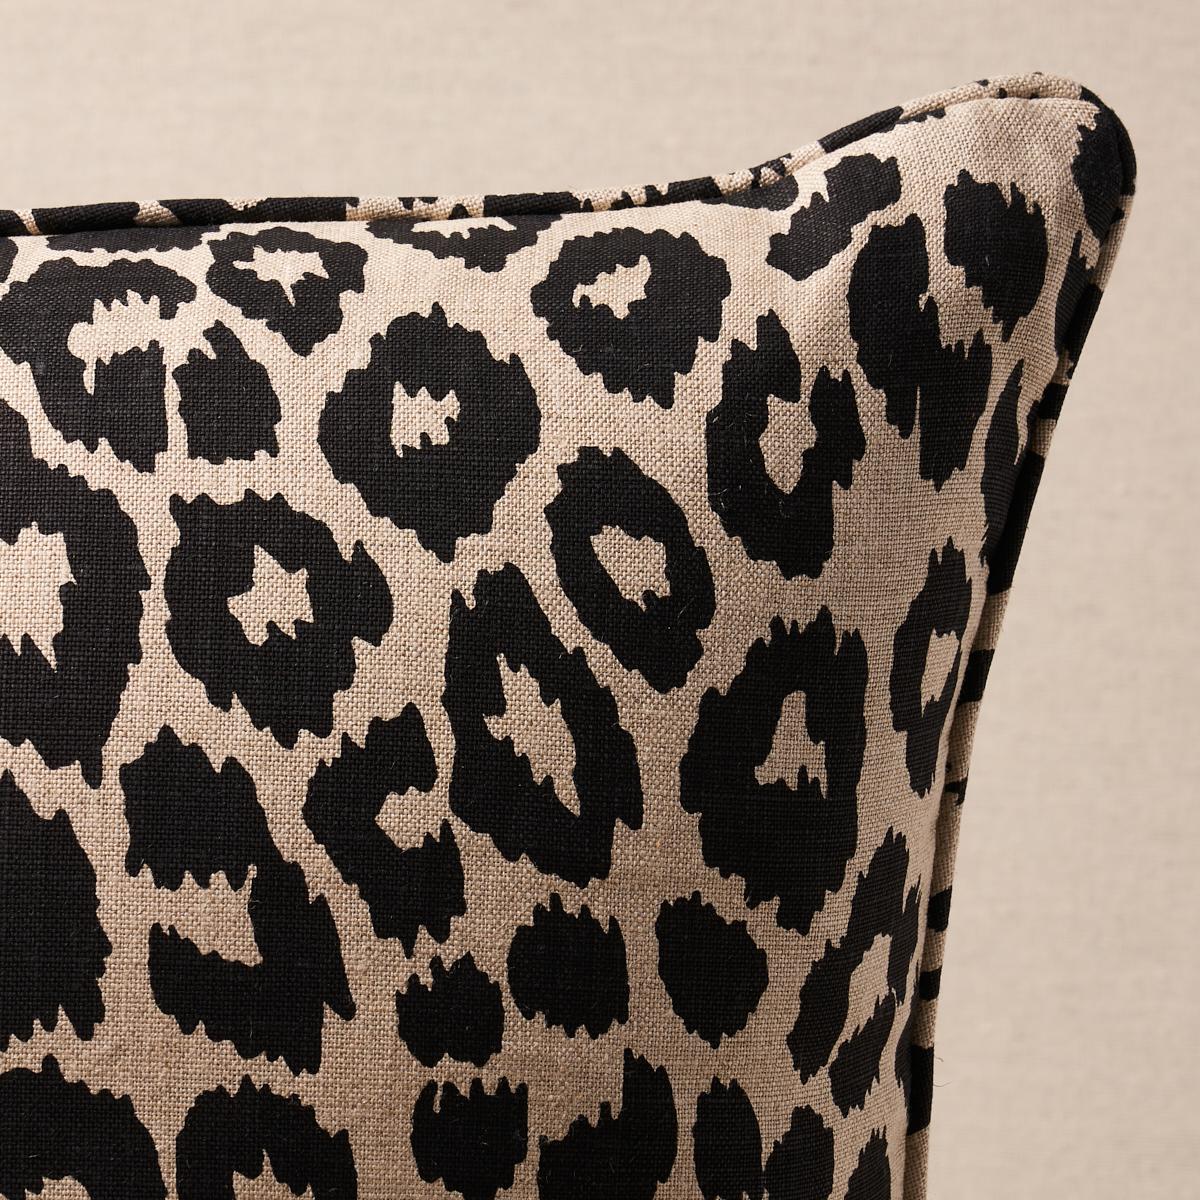 This pillow features Iconic Leopard with a self welt finish. We first introduced this sexy pattern in the 1970s. In 11 versatile colors, it's eternally chic. Pillow includes a feather/down fill insert and hidden zip closure.
